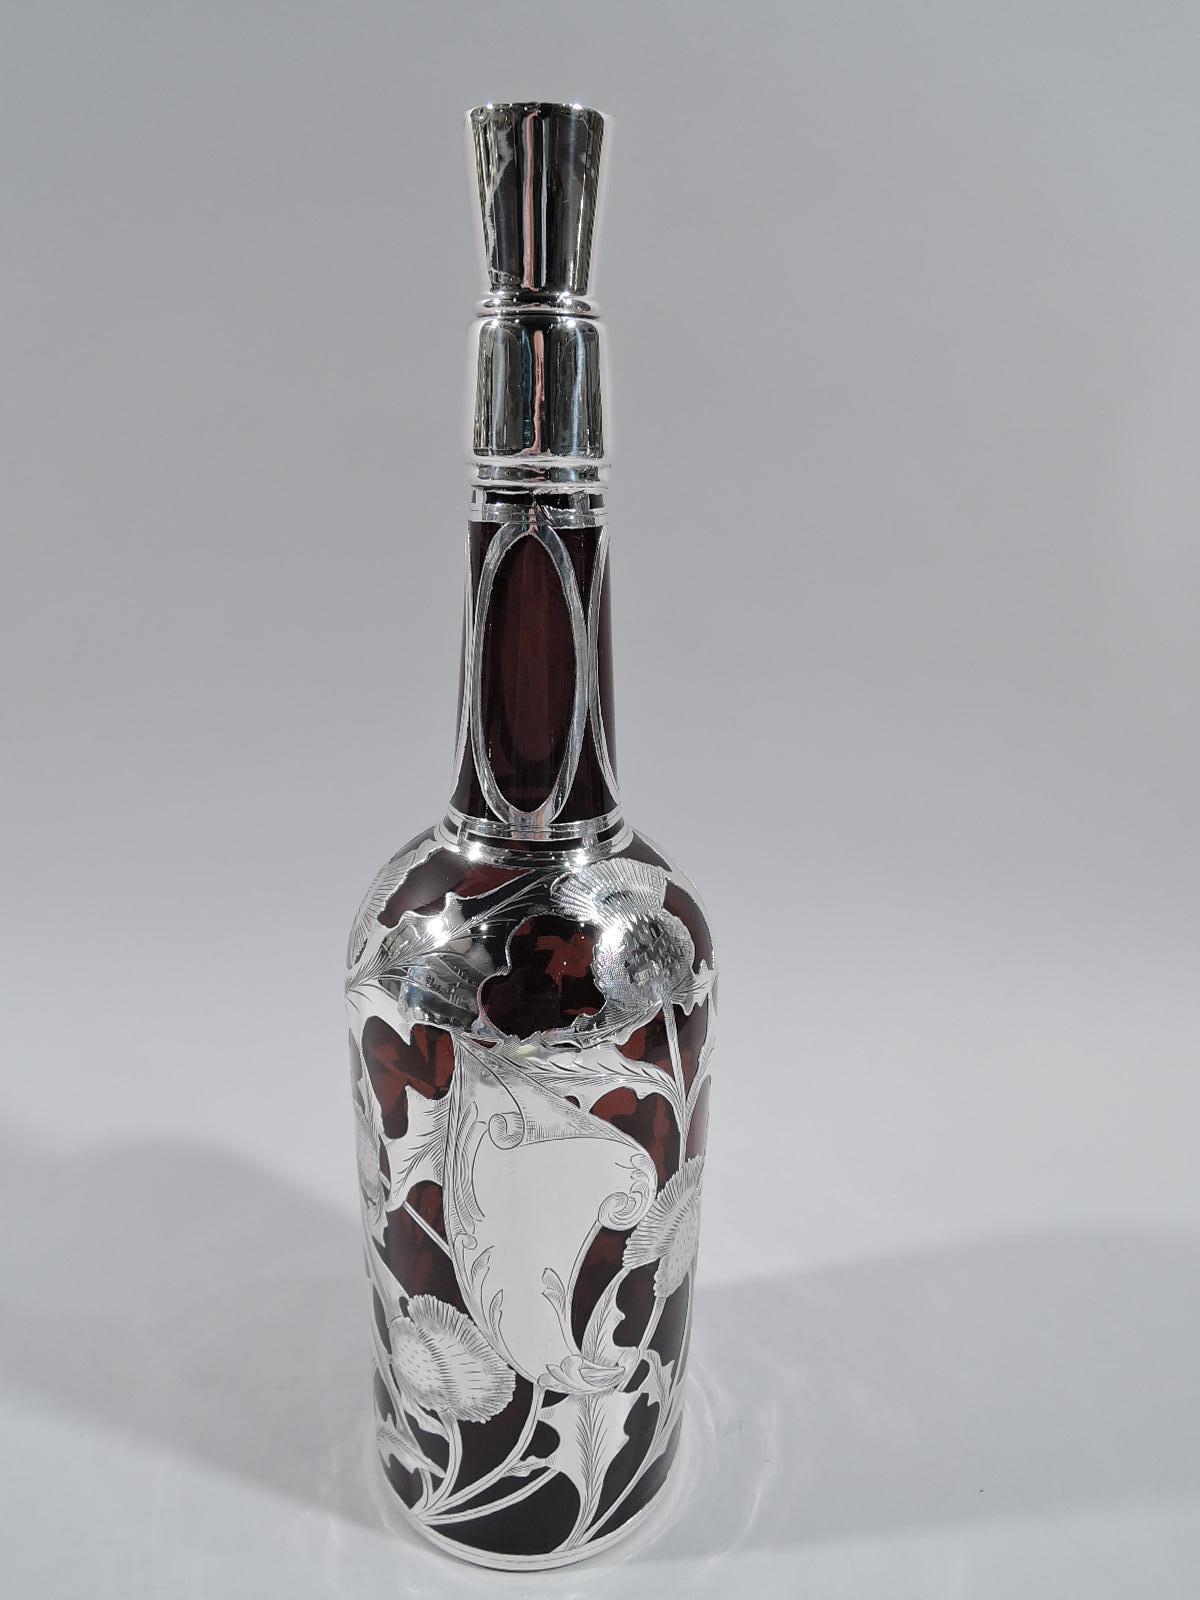 Turn-of-the-century Art Nouveau amber glass bottle decanter with engraved silver overlay. Traditional cylindrical form with sloping shoulder and upward tapering neck. Open and interlaced overlay with thistle motif and asymmetrical strapwork